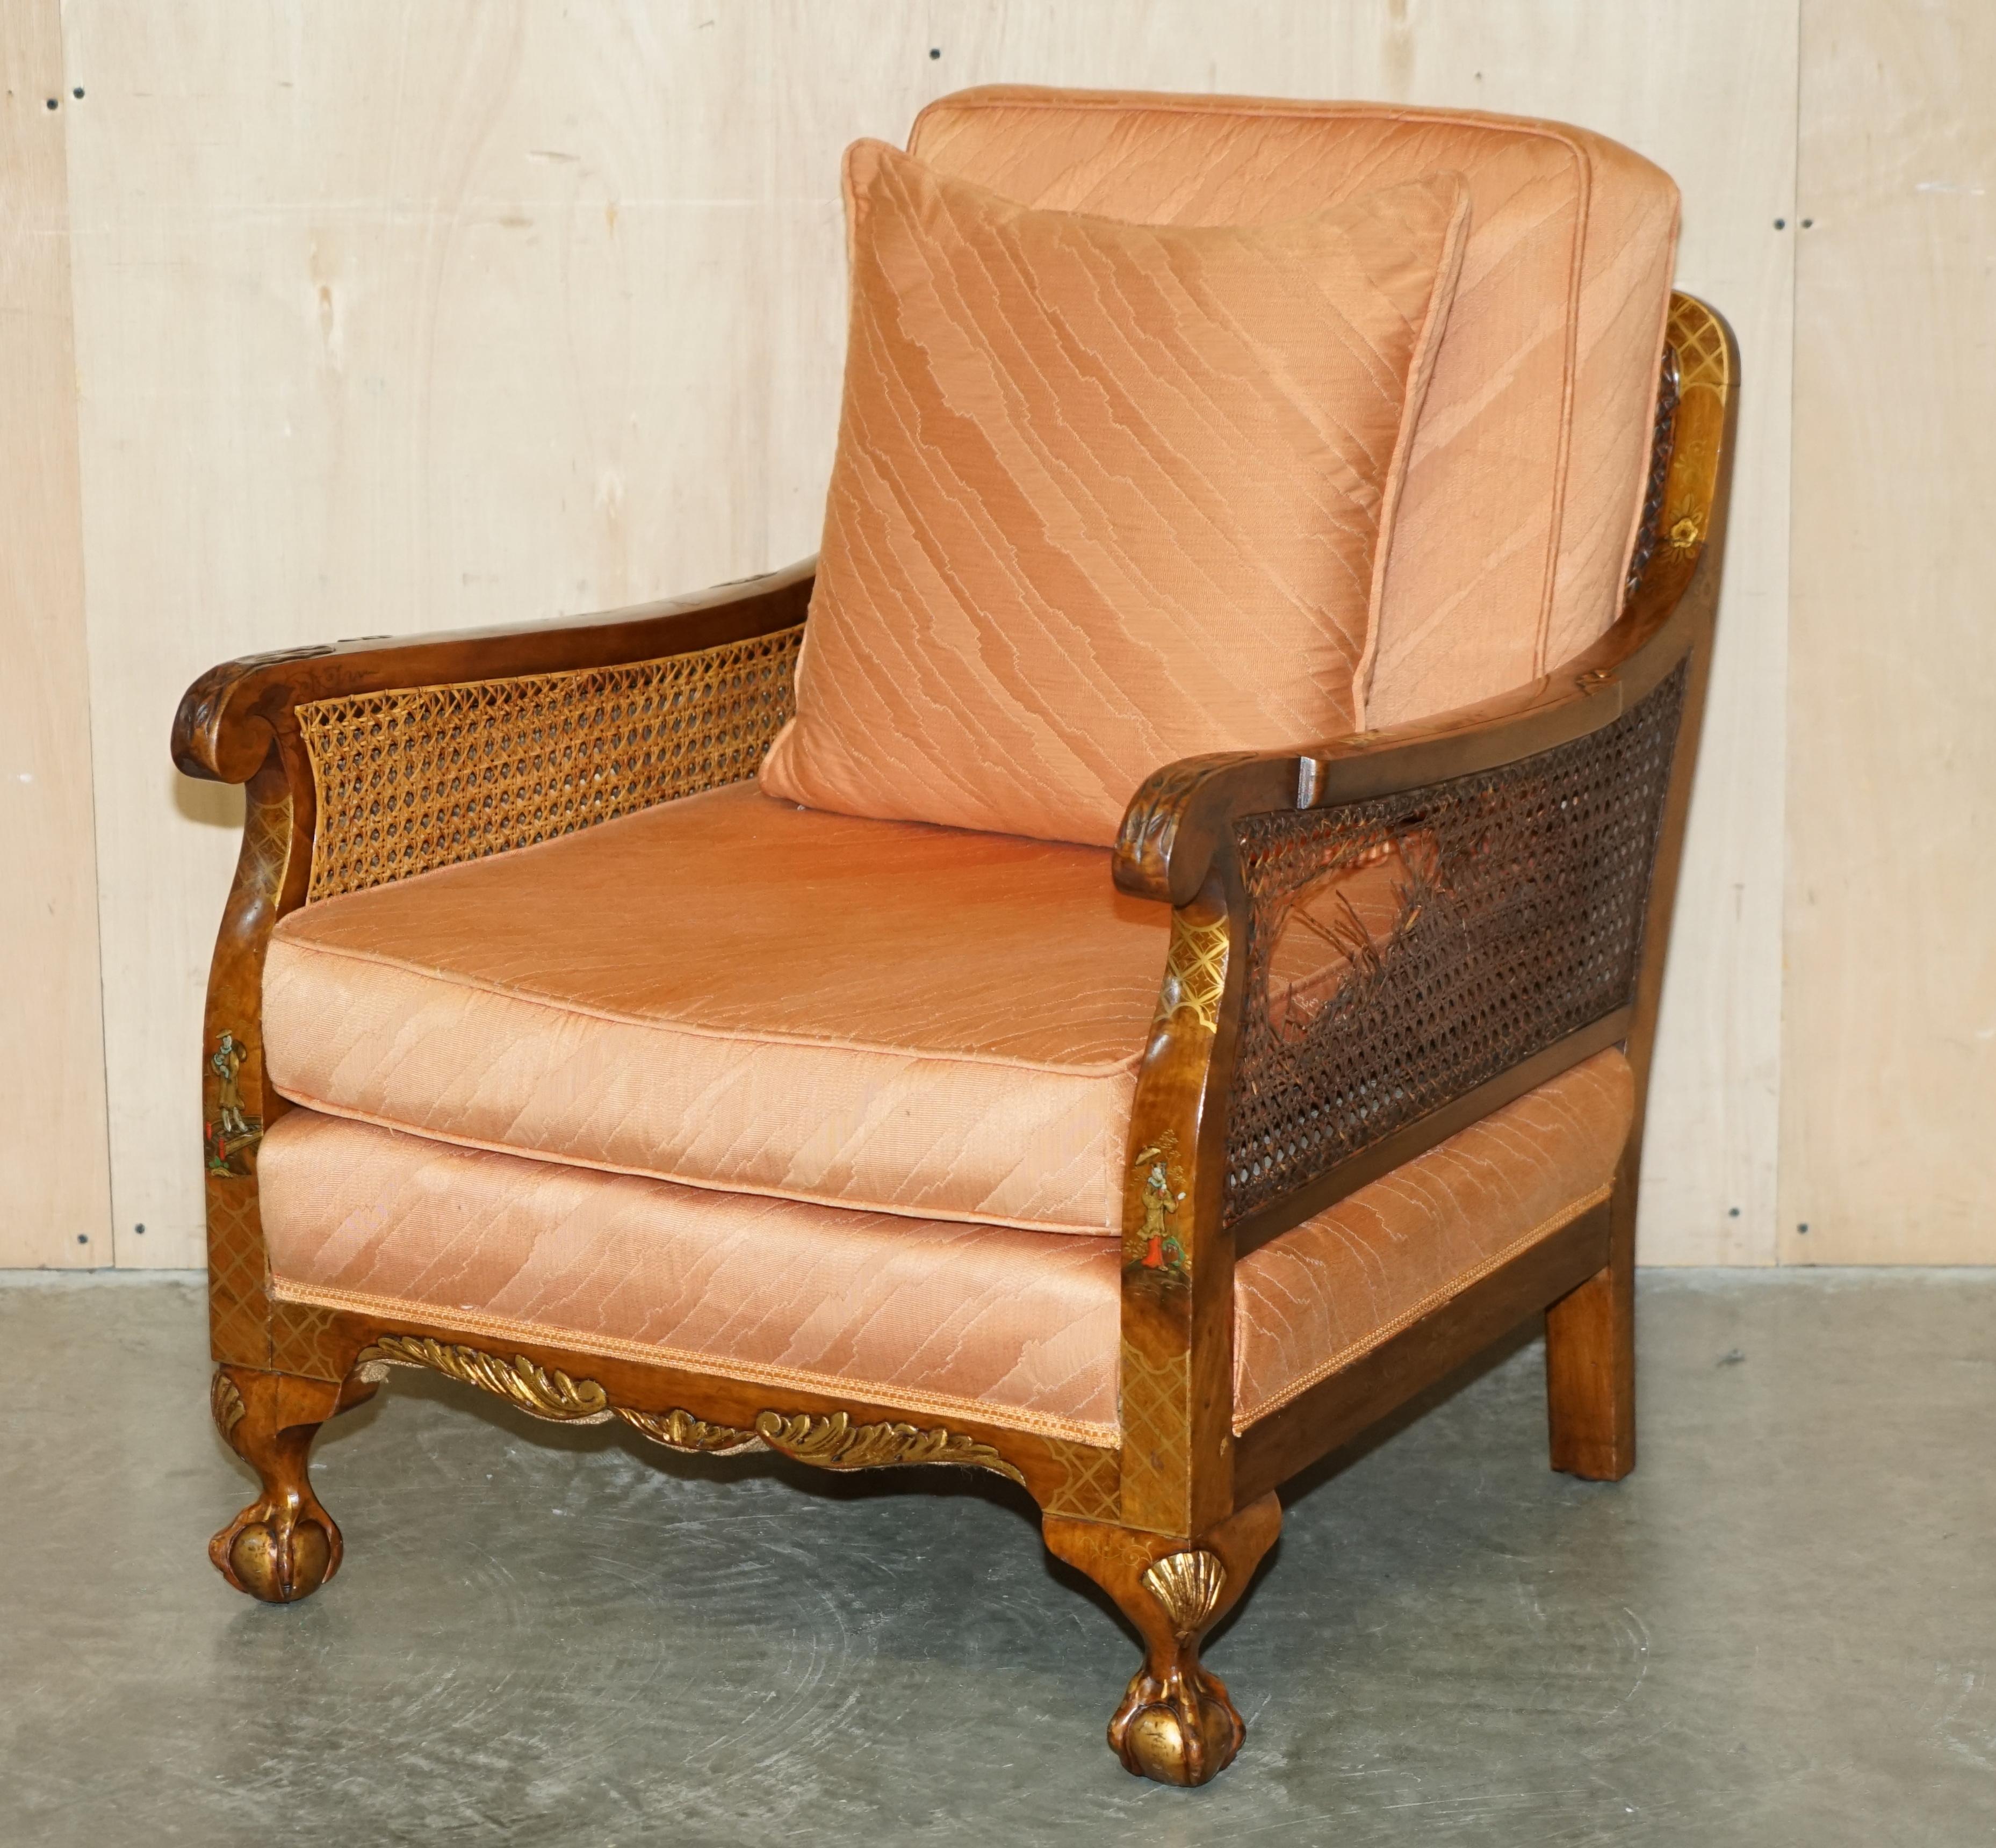 1920's WALNUT & CHINOISERIE 3 PIECE BERGERE SOFA ARMCHAIR SUITE FOR RESTORATION For Sale 7